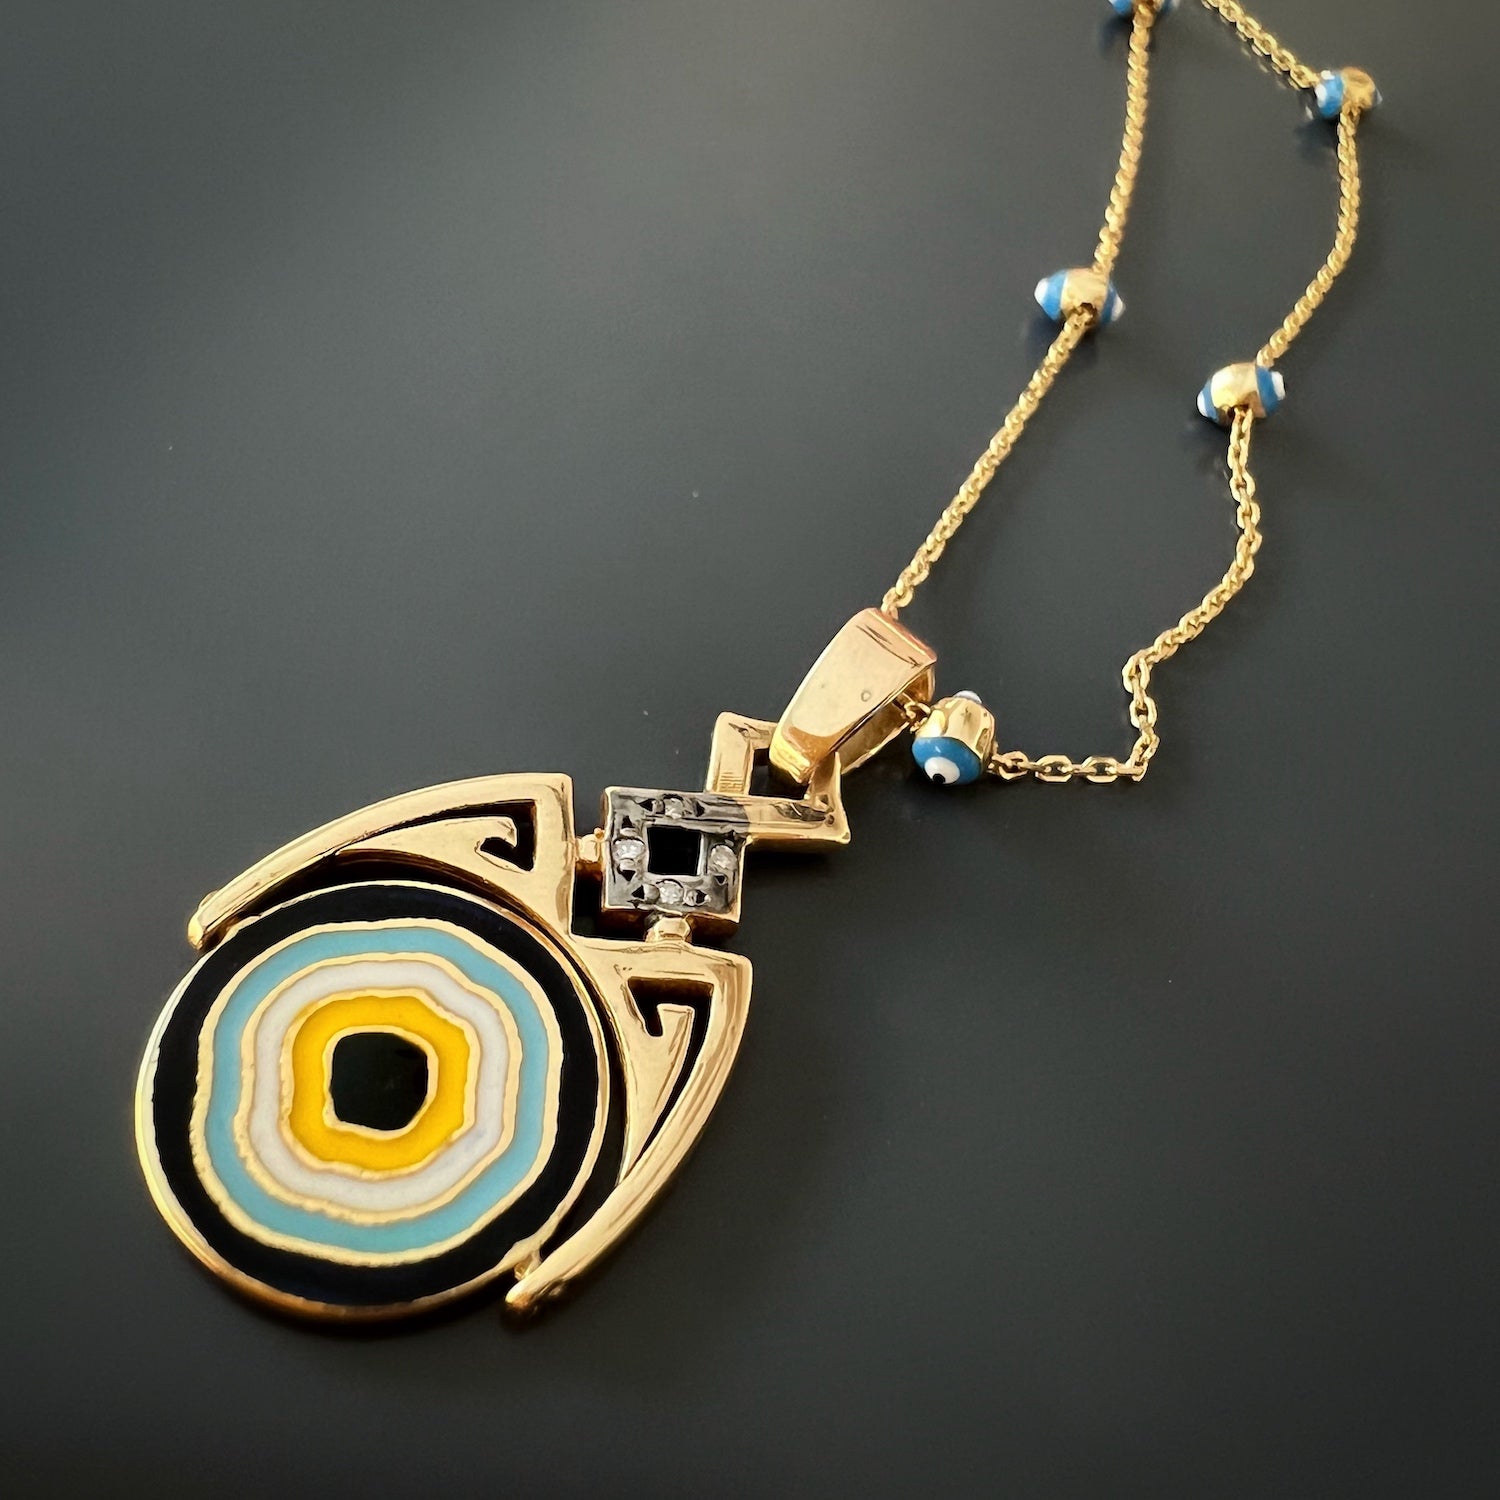 14k Gold Evil Eye Necklace with Diamonds - Embrace protection and style with this handmade necklace crafted from 14k yellow gold. The Evil Eye pendant, embellished with sparkling diamonds and vibrant enamel, is a symbol of good luck and positive energy.